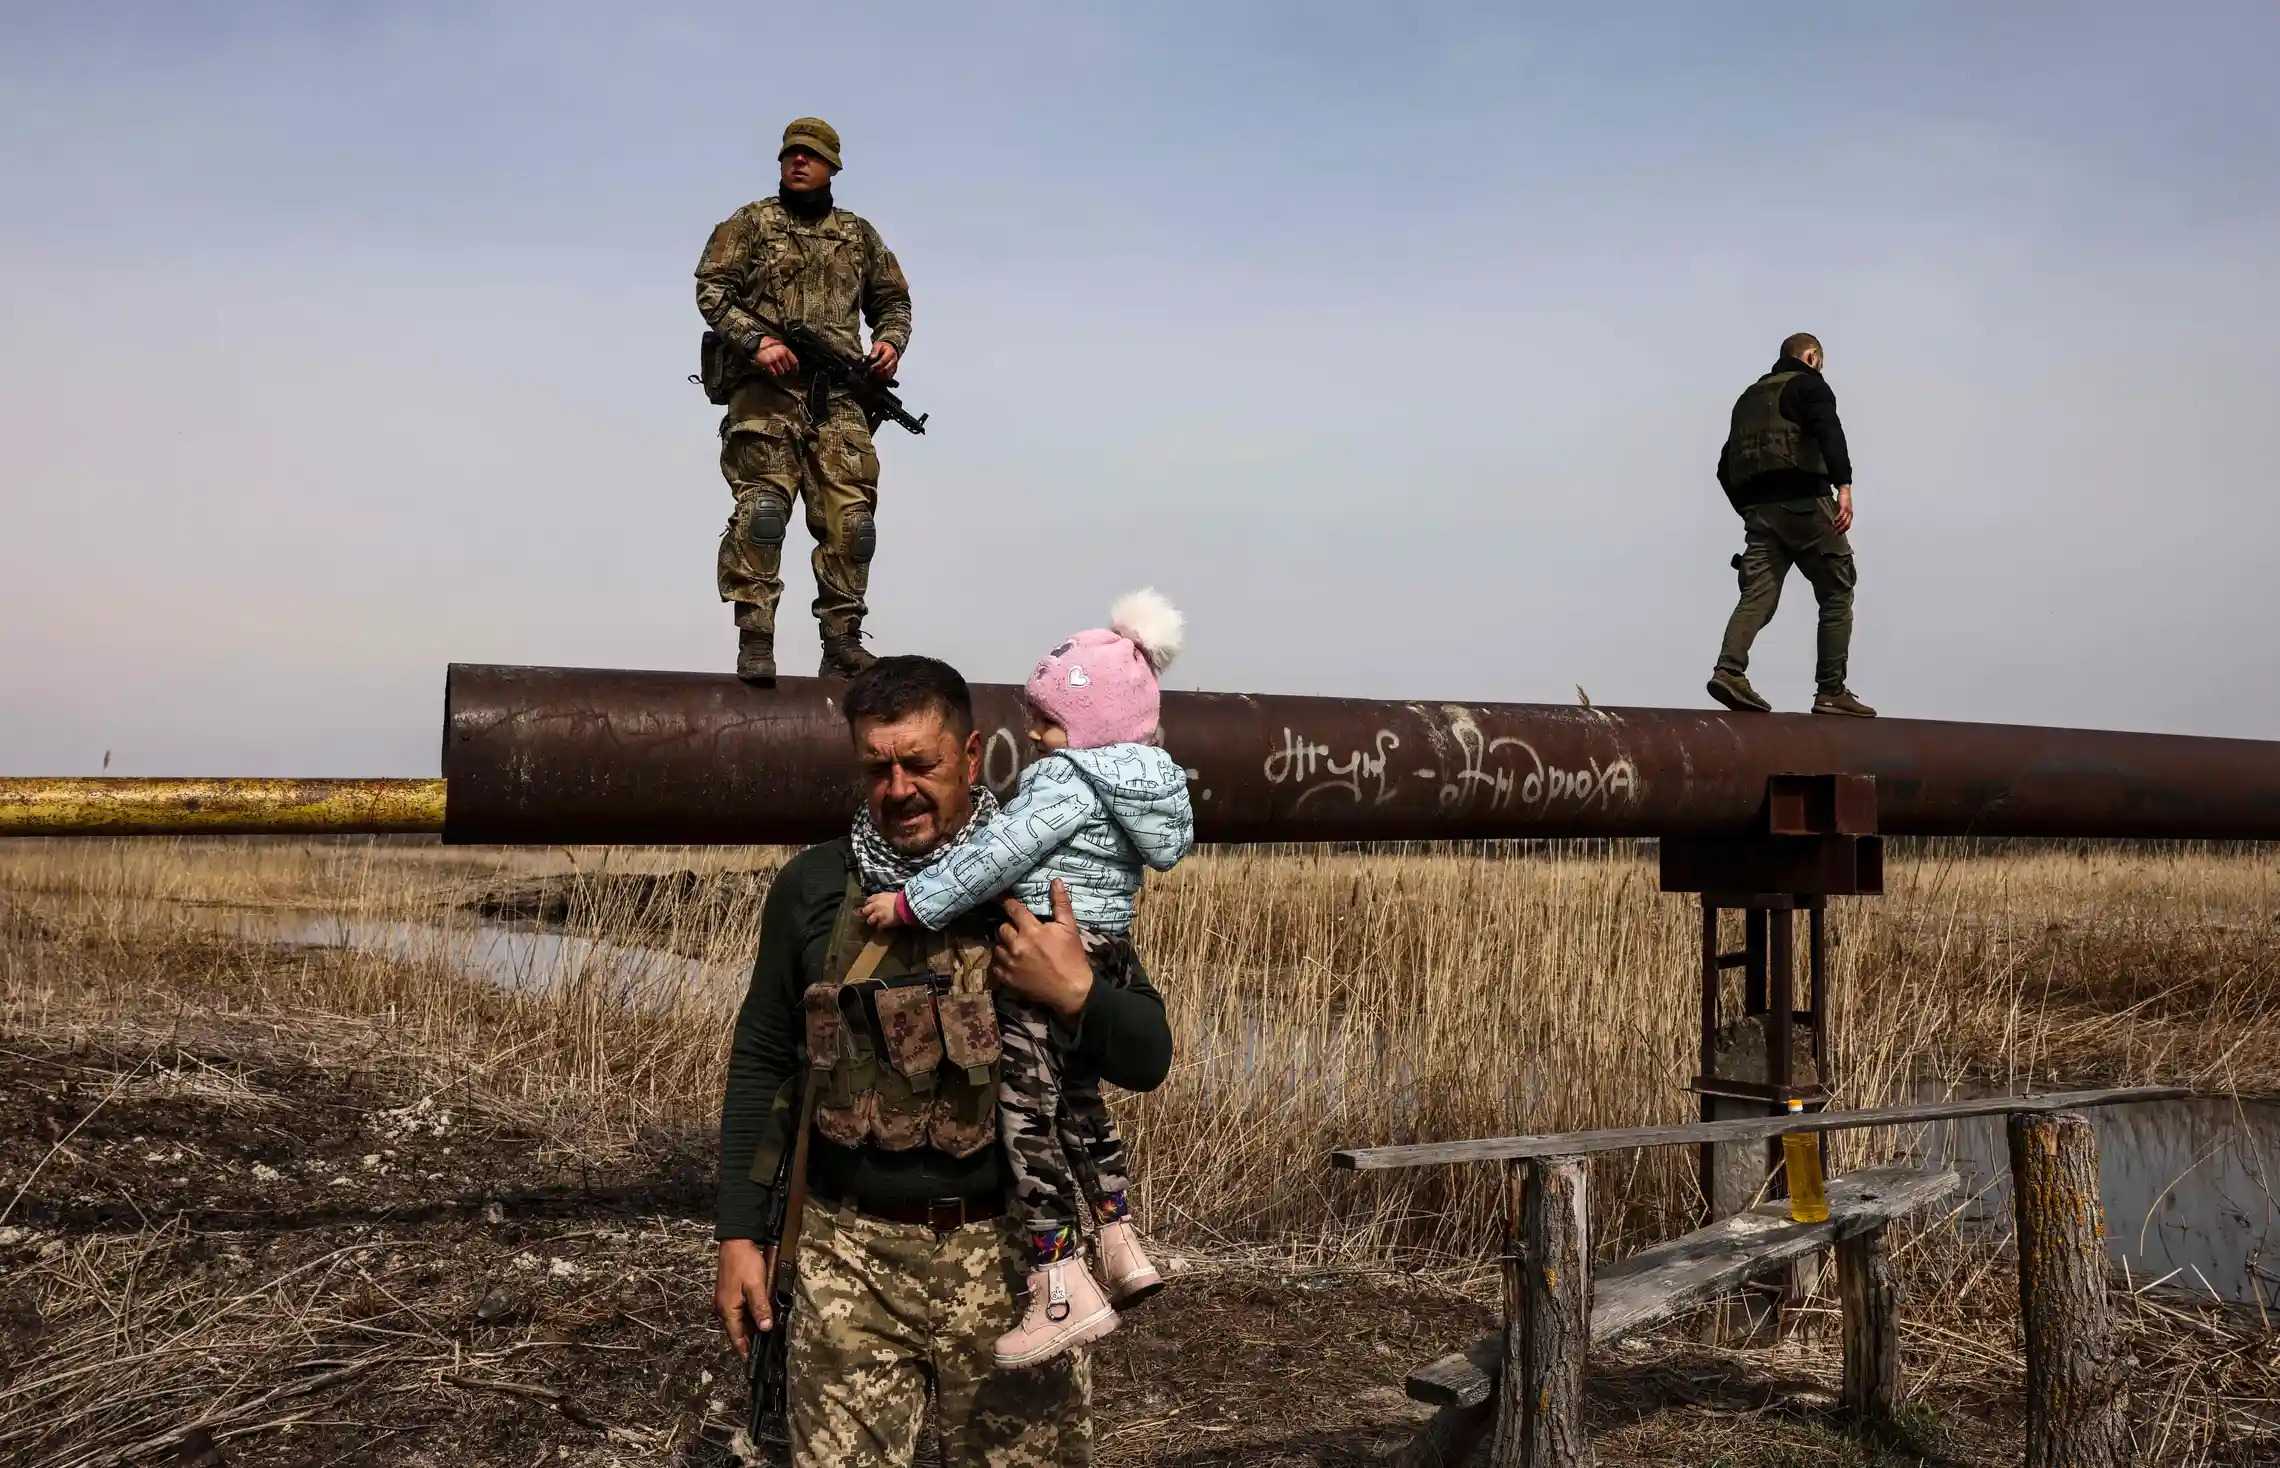 A Ukrainian serviceman carries the baby of a displaced family to help to cross a river, on the outskirts of Kyiv, on March 31, 2022